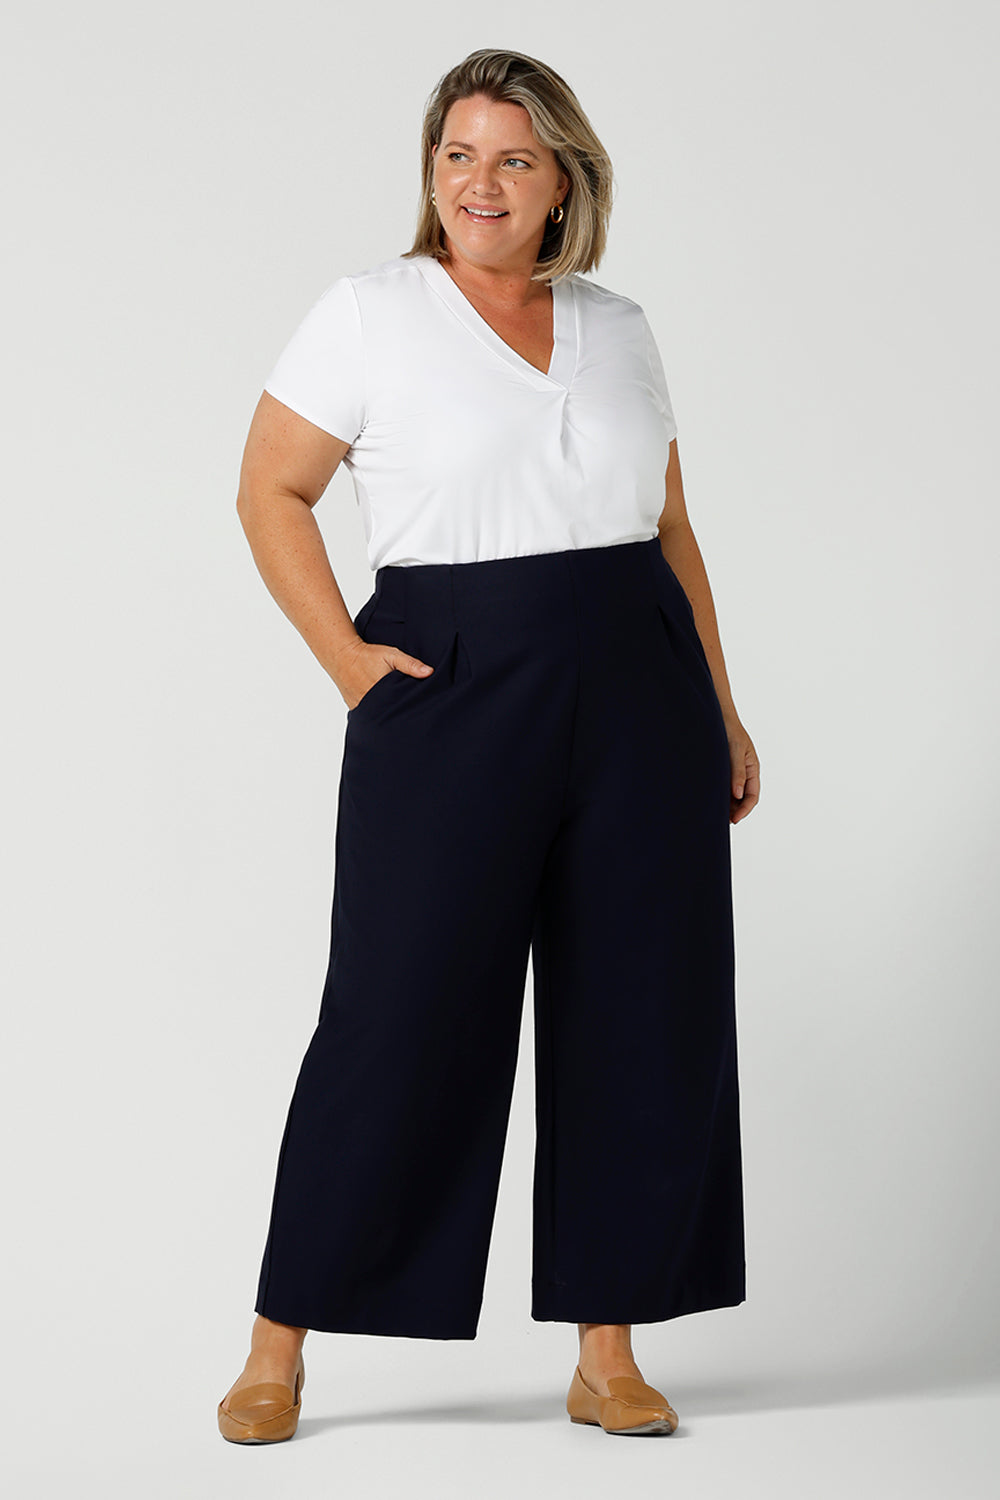 A good top for your capsule wardrobe, this V-neck tailored top in white bamboo jersey has short sleeves and is worn with Navy blue, wide leg culotte pants. Shown on a size 18, curvy woman, this is a great top for plus size office wear. Made in Australia by ethical clothing brand, Leina & Fleur, shop ladies tops in petite to plus sizes online in their online fashion boutique.